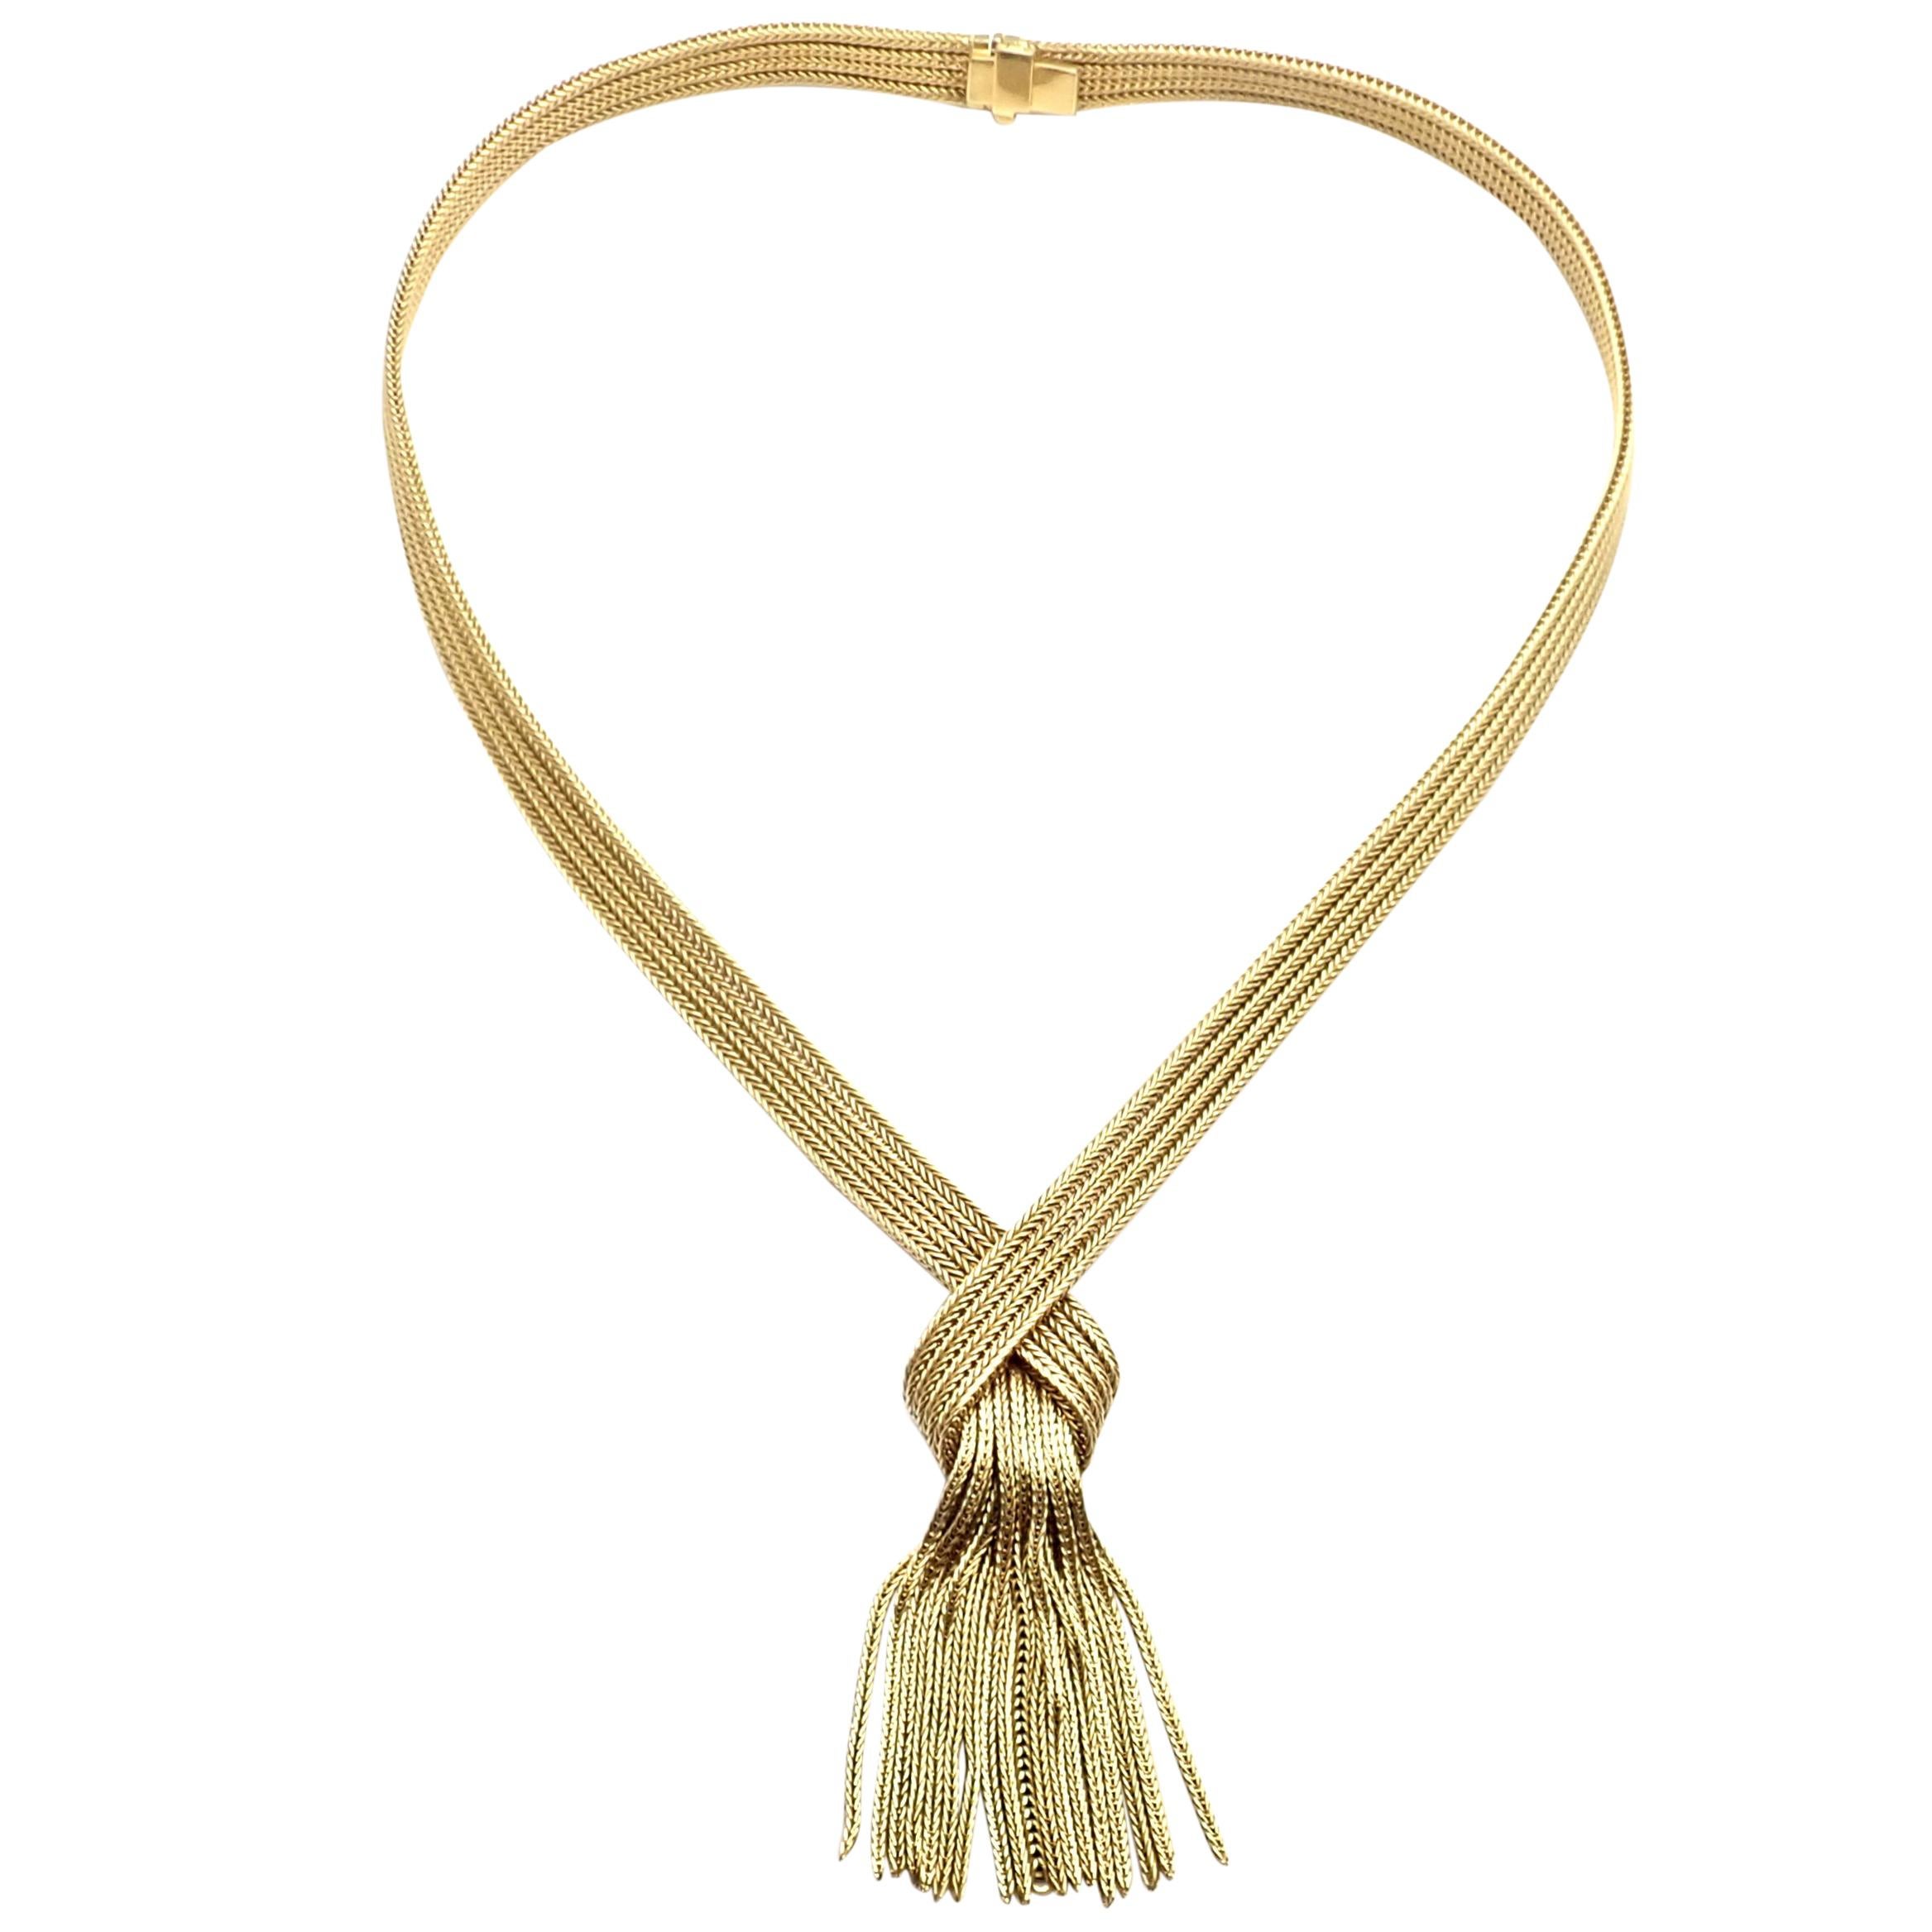 Vintage Grosse Germany Tassel Solid Yellow Gold Necklace, circa 1962